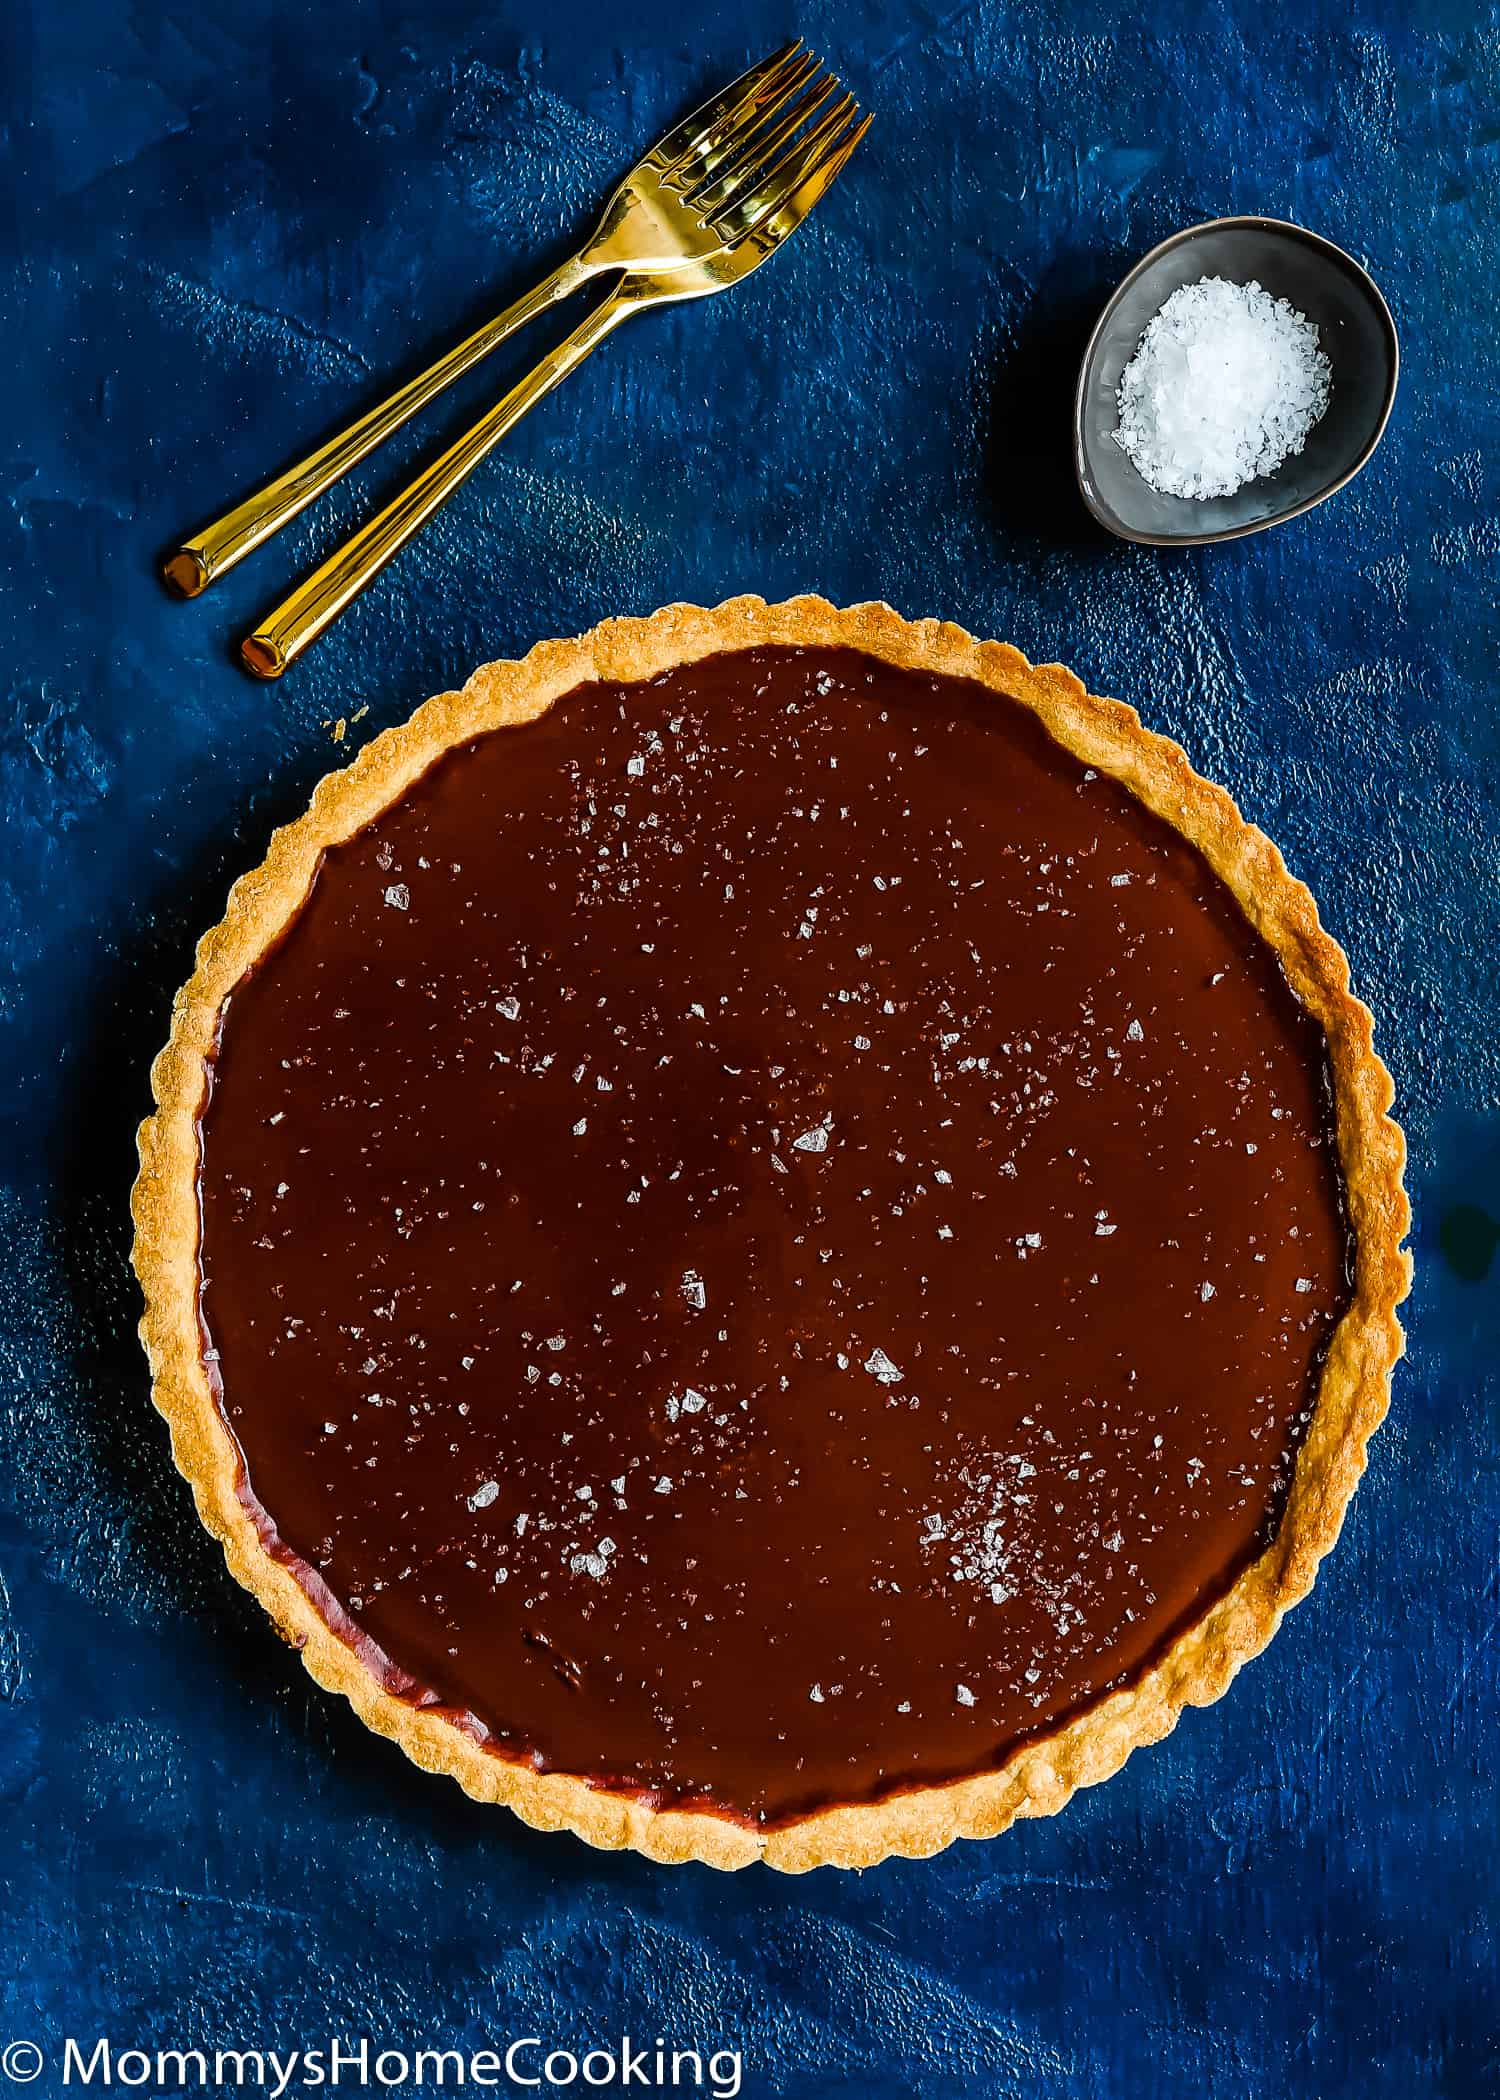 egg-free chocolate tart with sea salt flakes on top with two fork on the side.